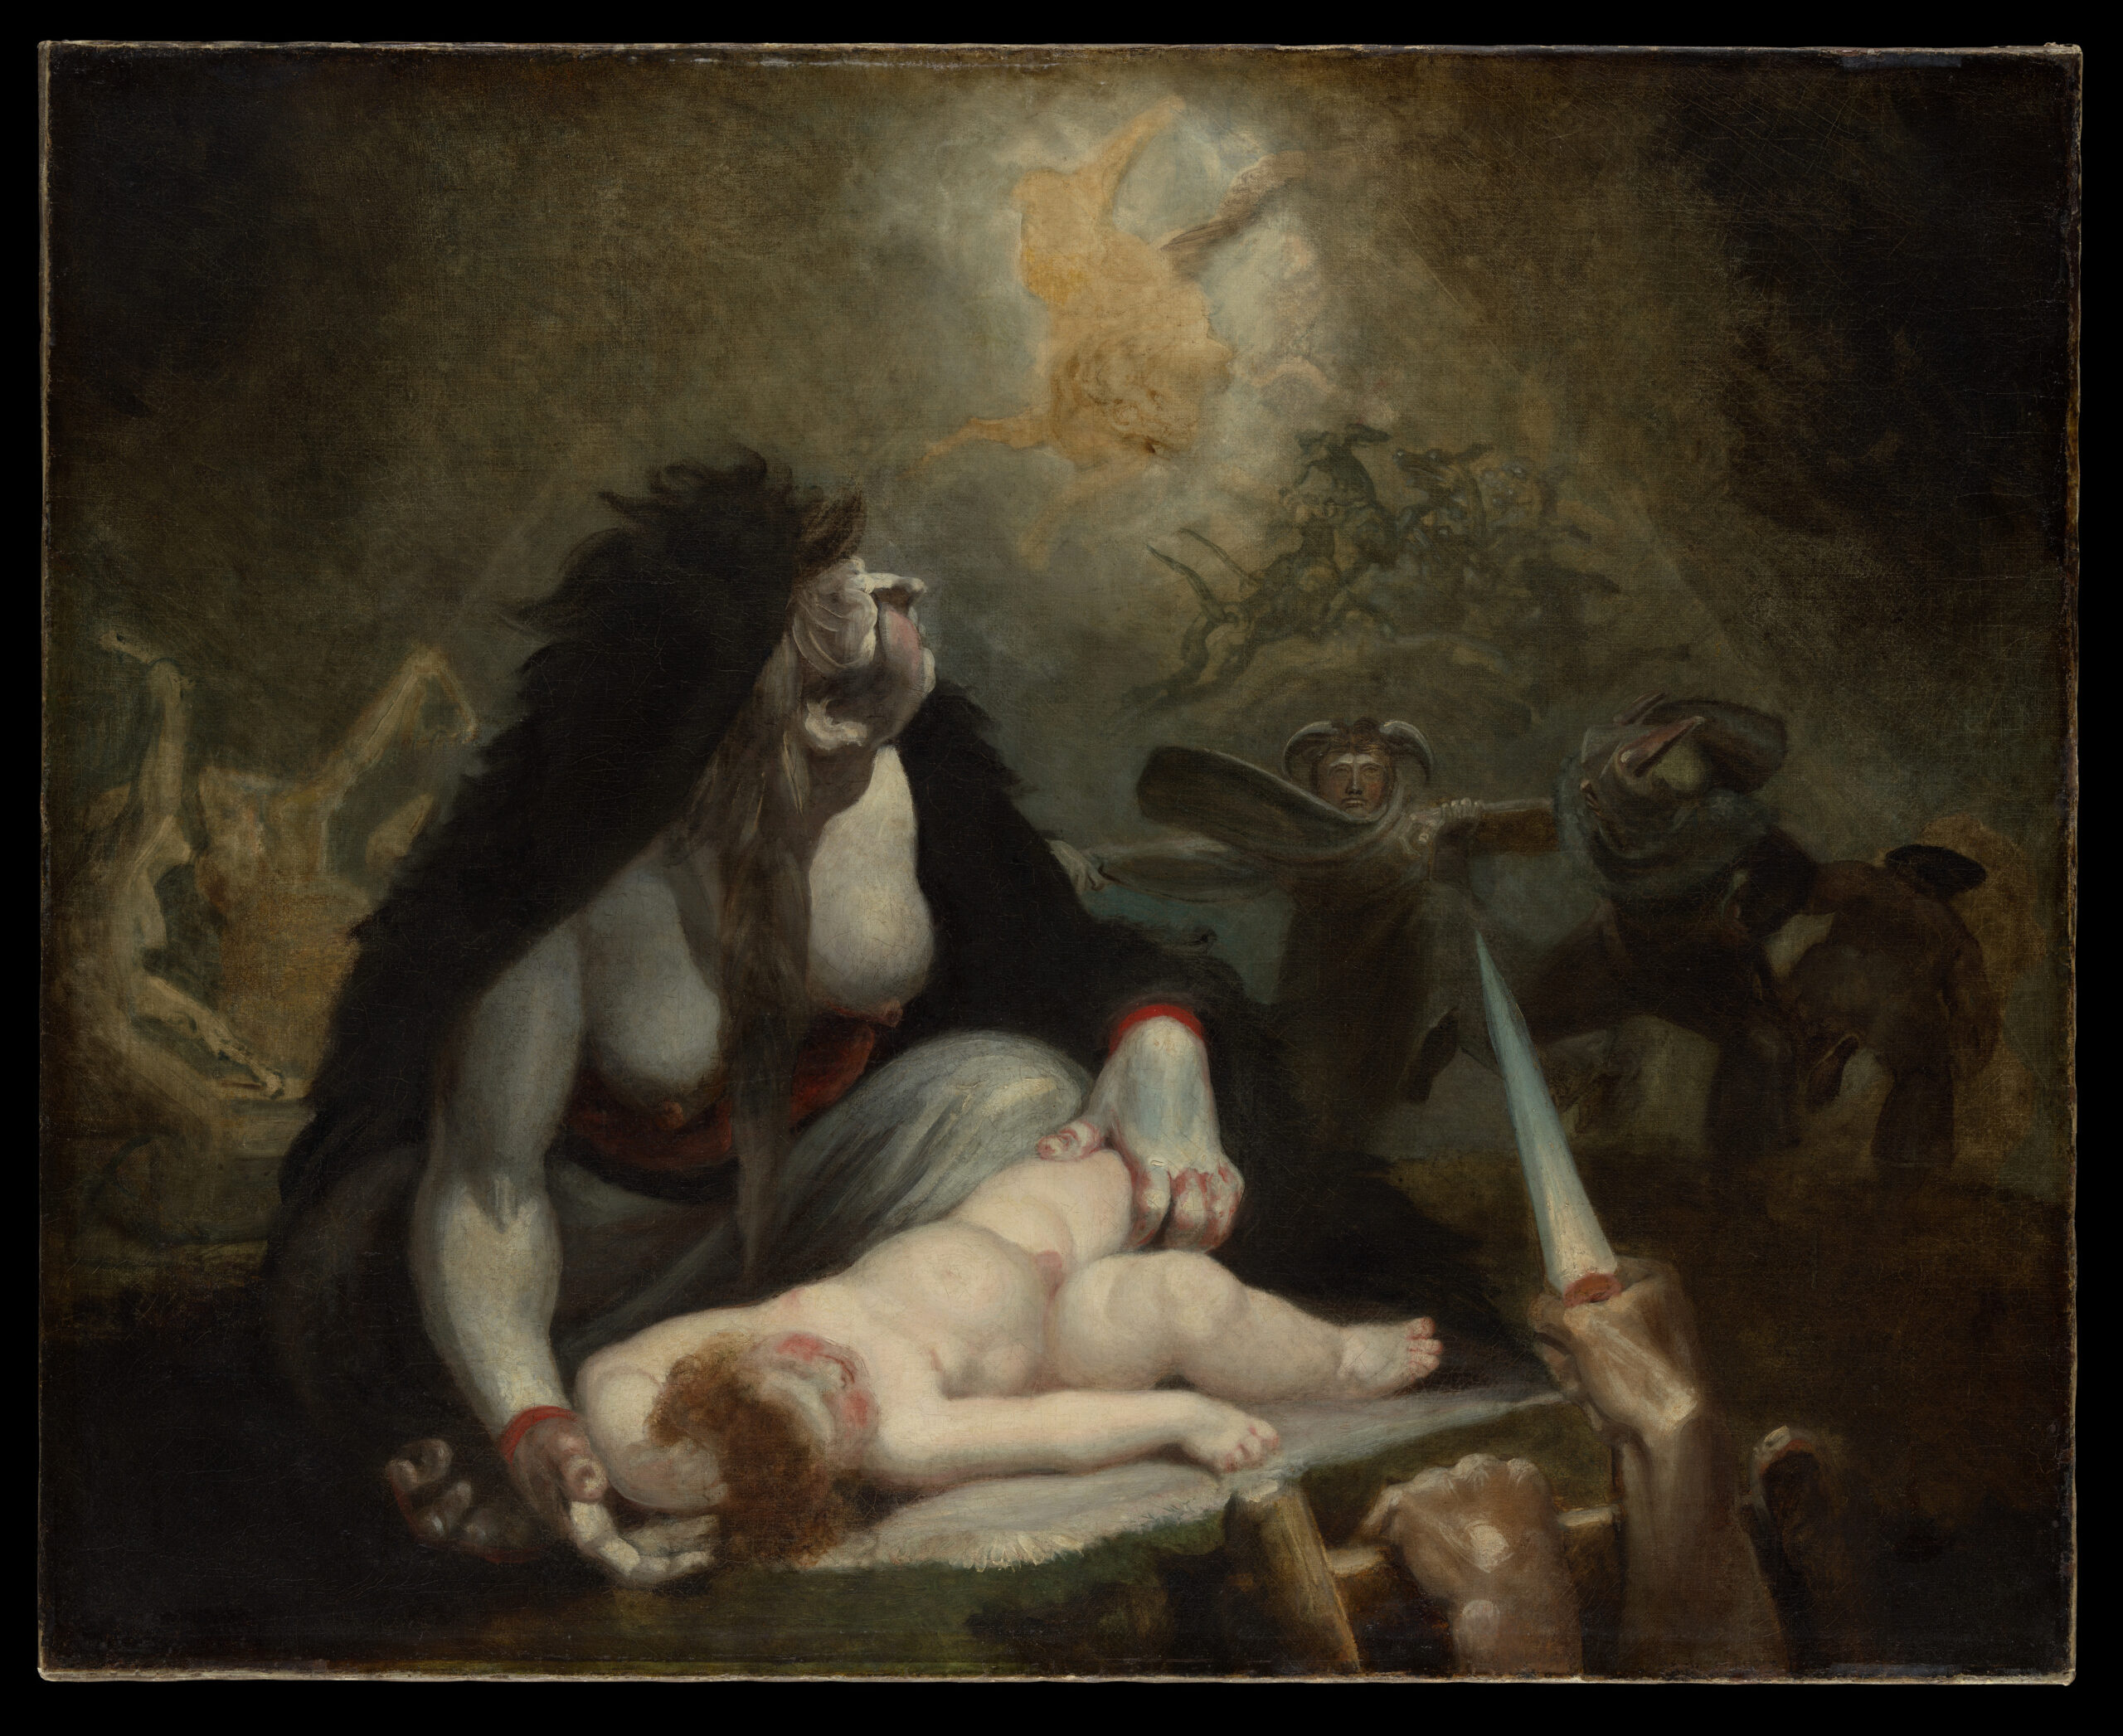 Henry Fuseli's The Night-Hag Visiting Lapland Witches, depicts the hag as a witch looming over a naked child while surrounded by advancing figures. In the foreground by the child there is a hand holding a knife